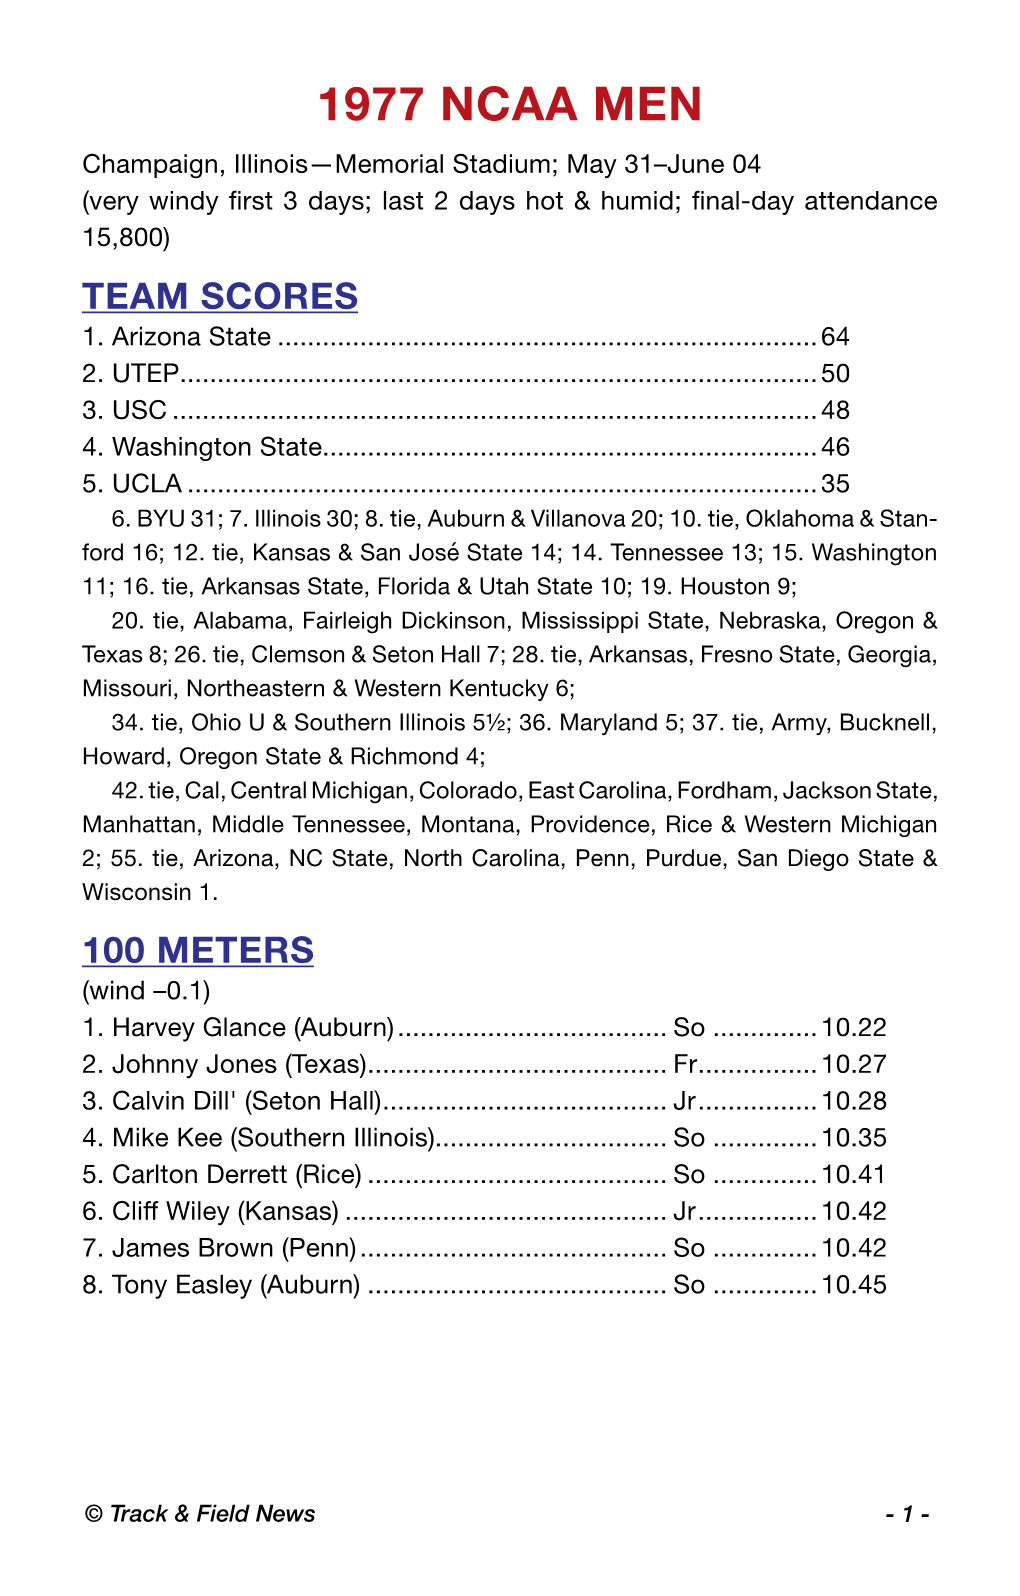 1977 NCAA MEN Champaign, Illinois—Memorial Stadium; May 31–June 04 (Very Windy First 3 Days; Last 2 Days Hot & Humid; Final-Day Attendance 15,800) TEAM SCORES 1